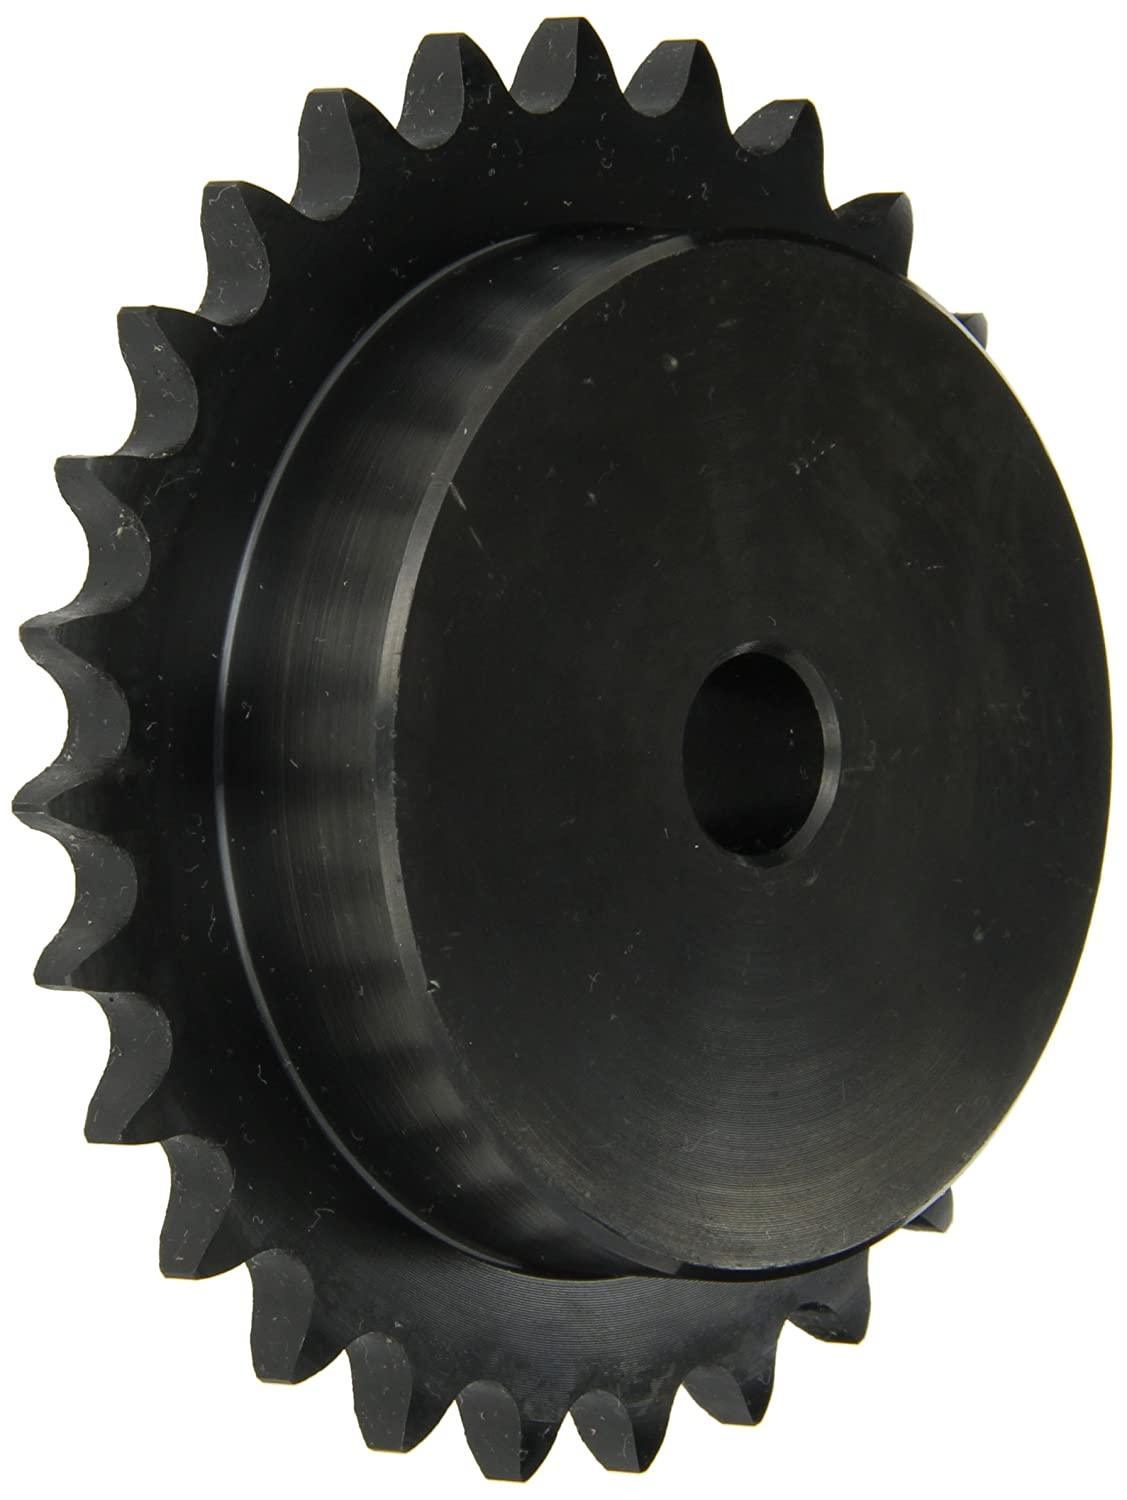 100B45 Roller Chain Sprocket With Stock Bore - Forces Inc